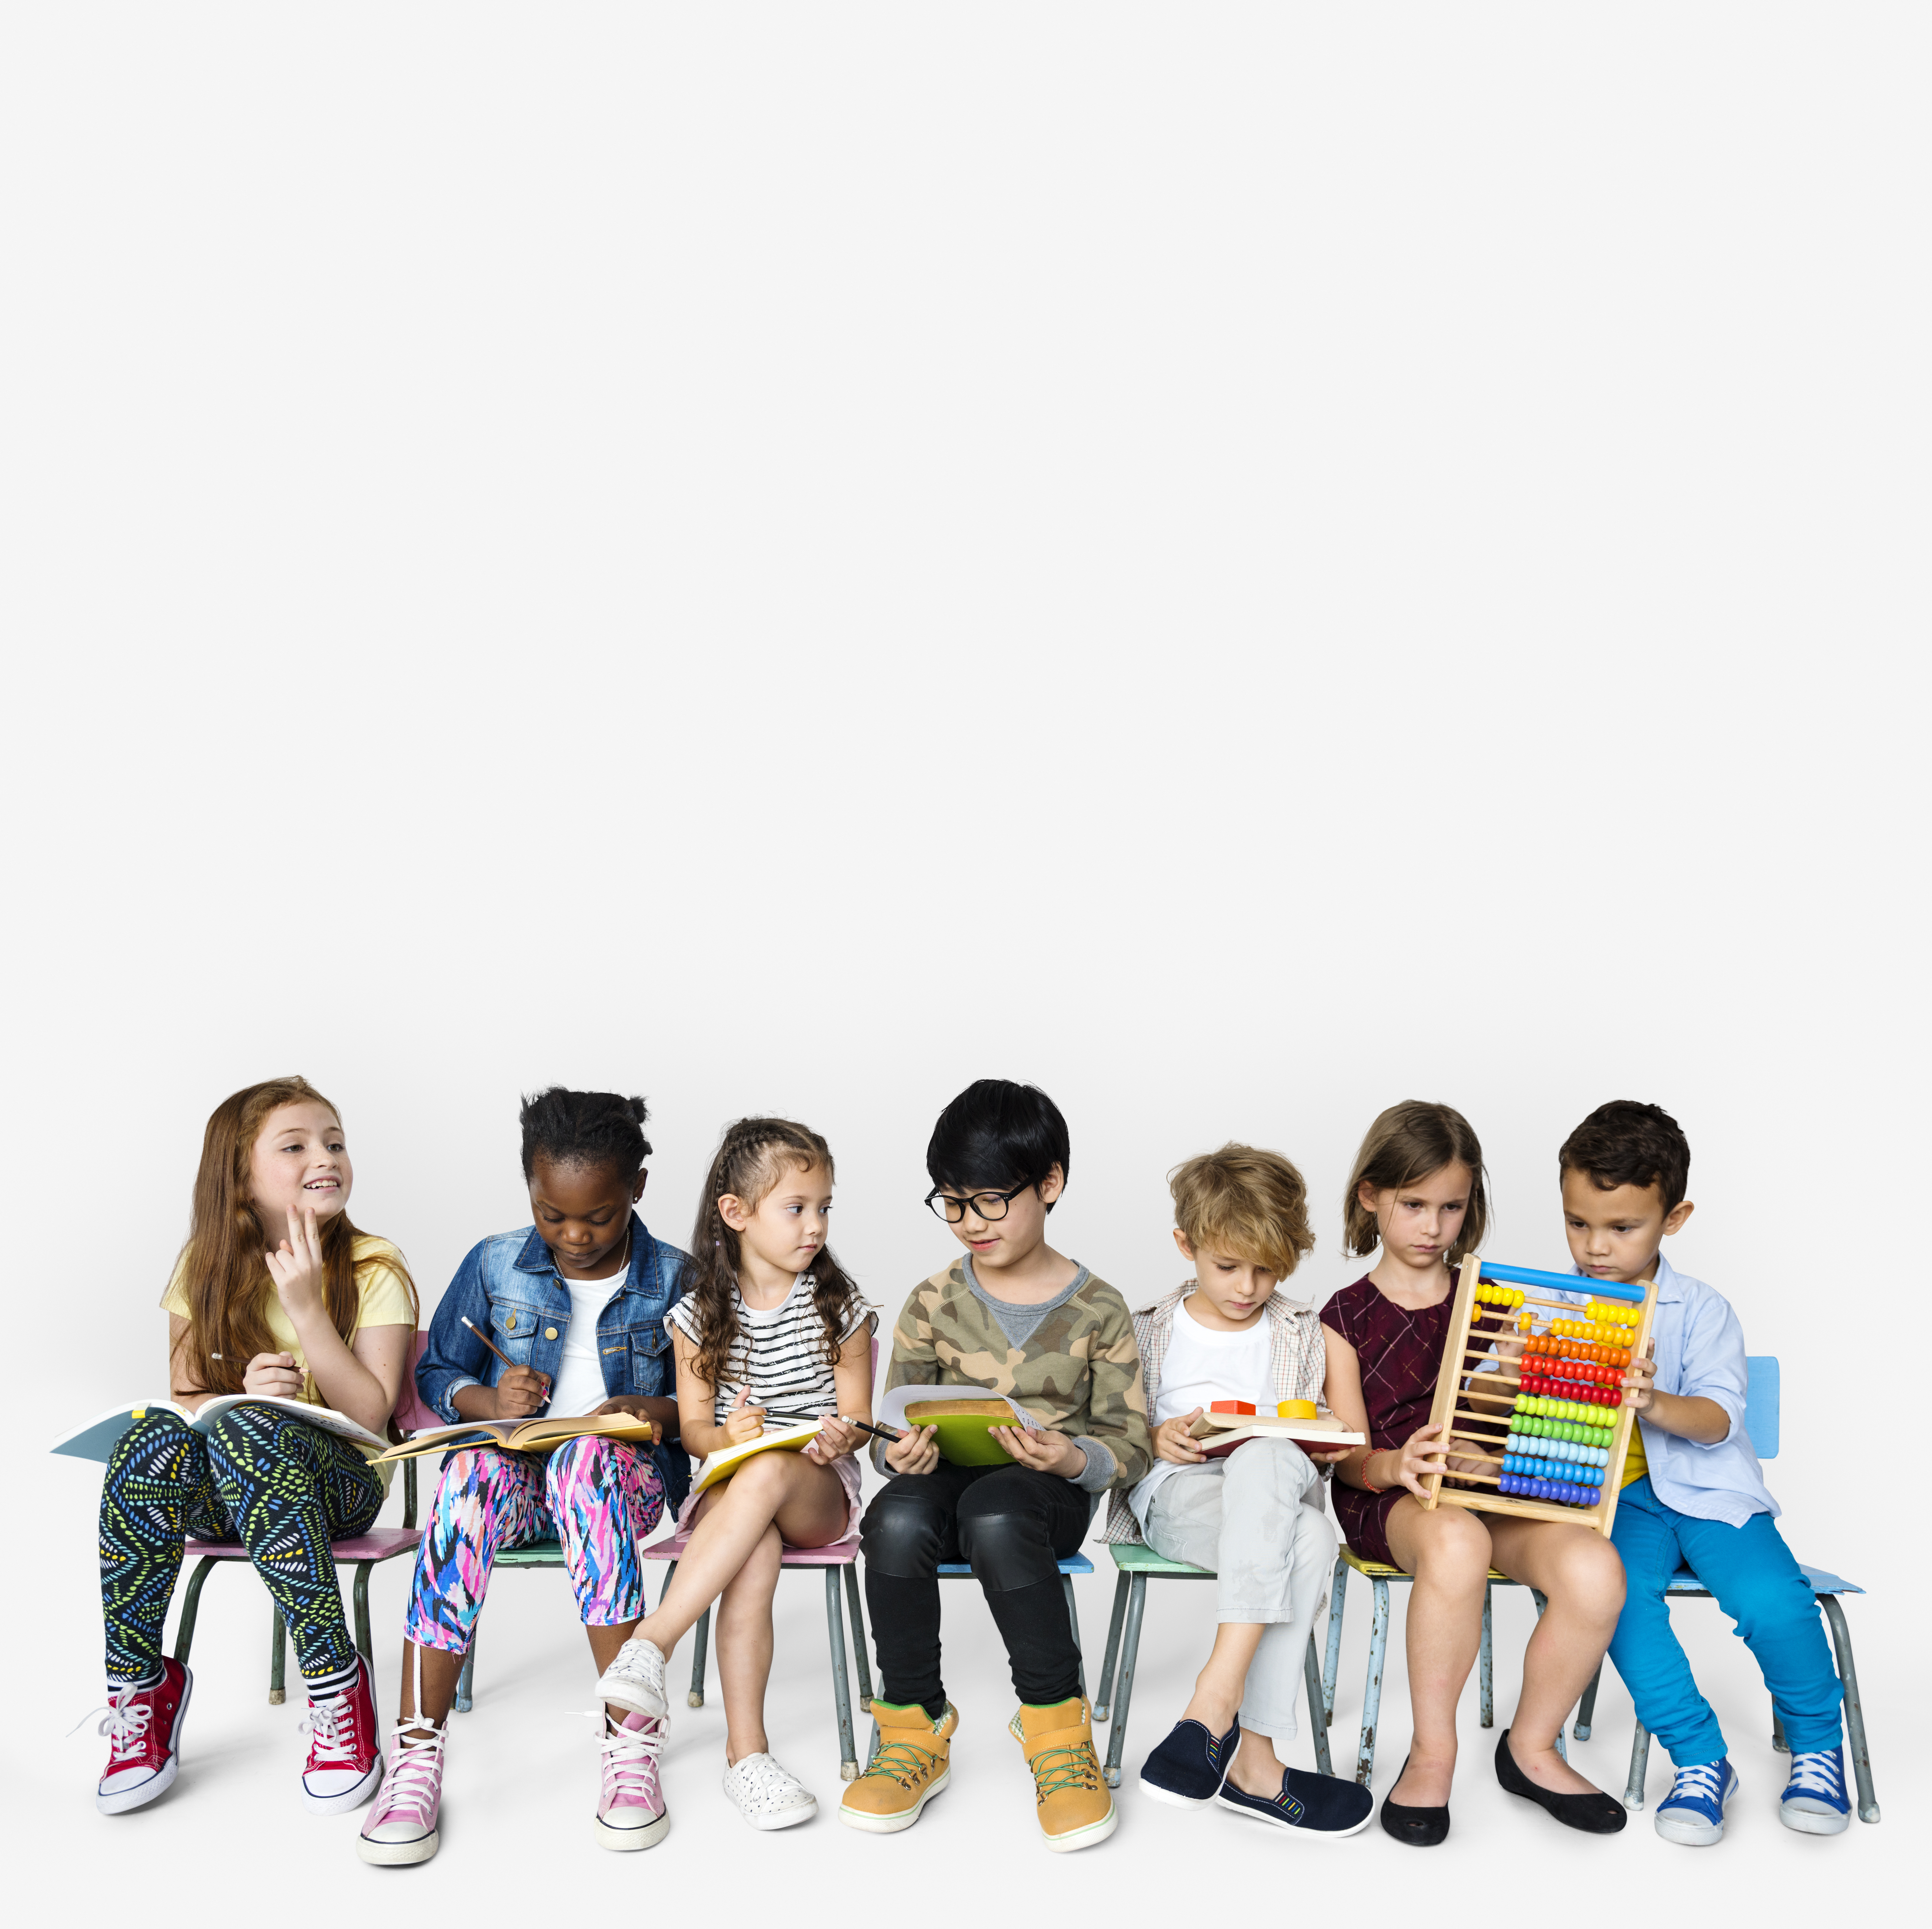 Group of kids sitting in chairs holding books, pencils, and an abacus on a white background. 